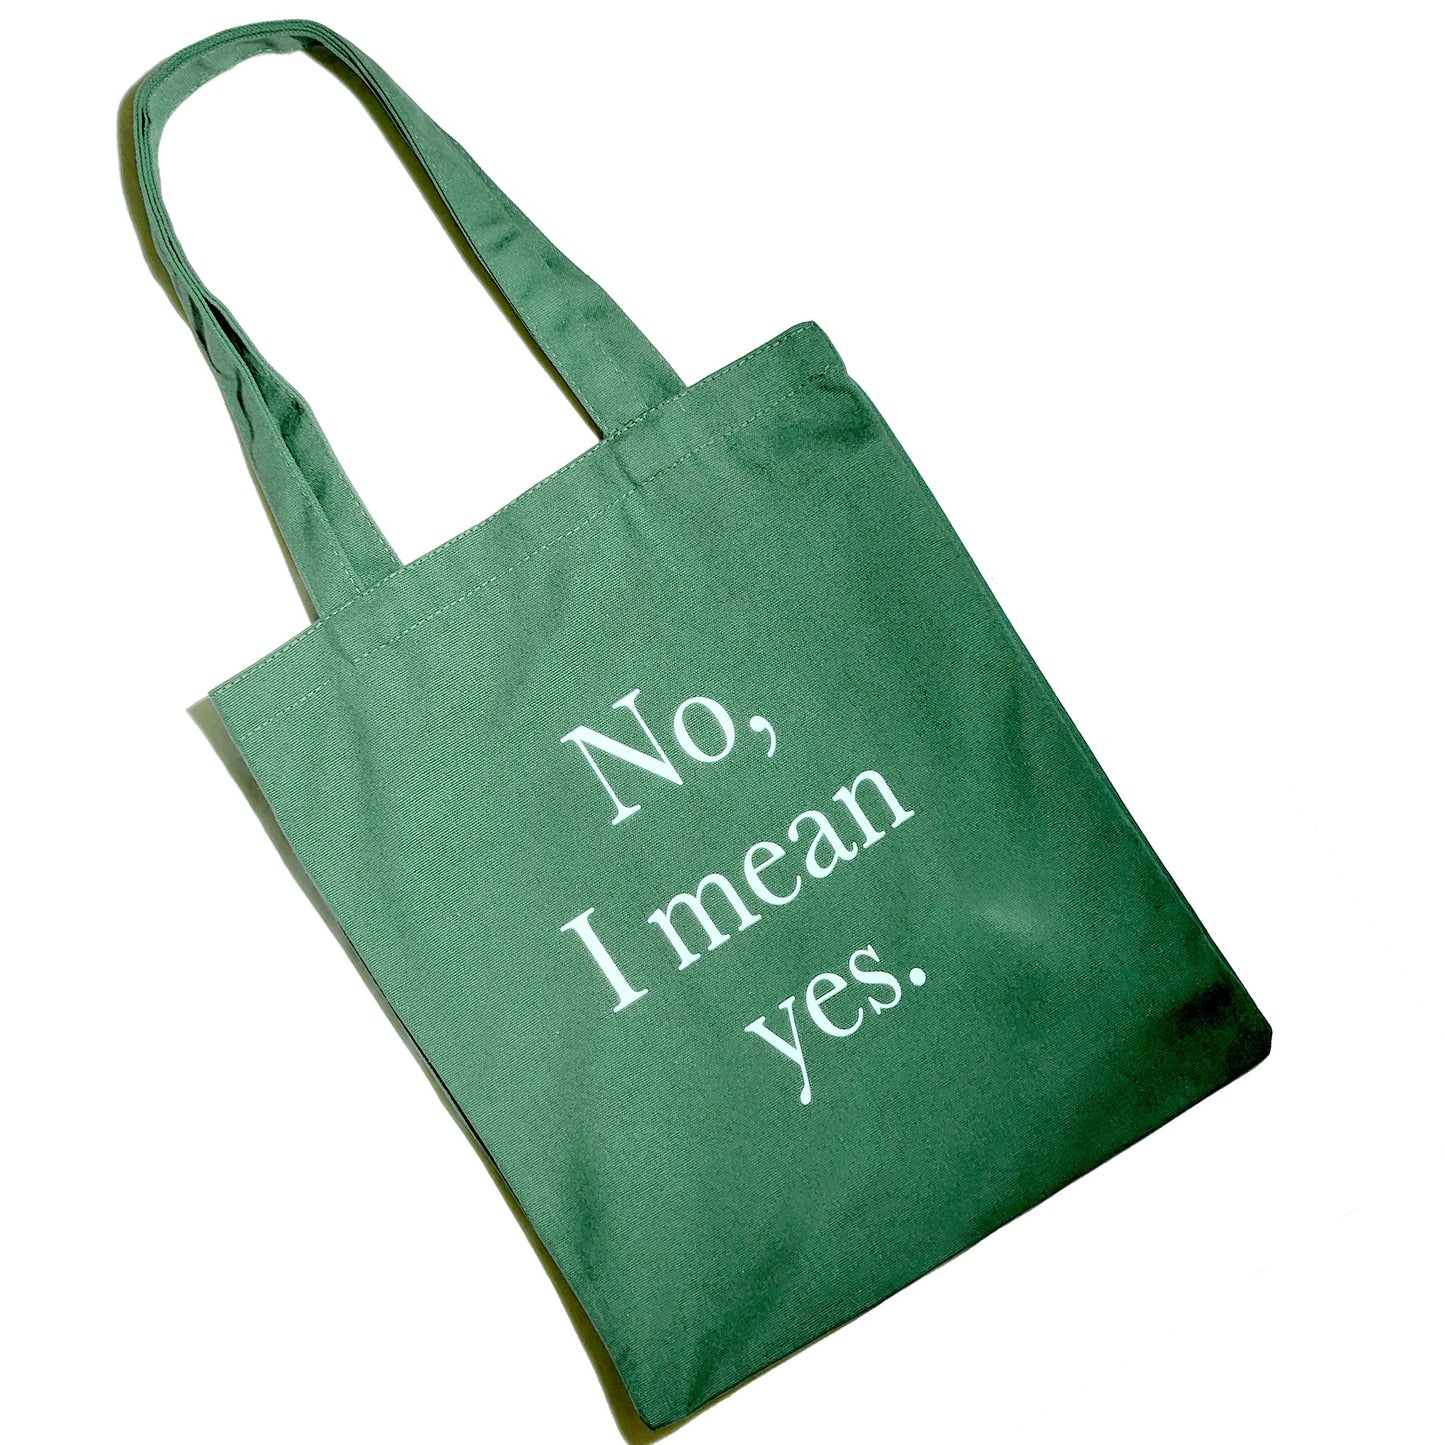 Matter Matters Yes I Mean No • Green/ Tote Bag